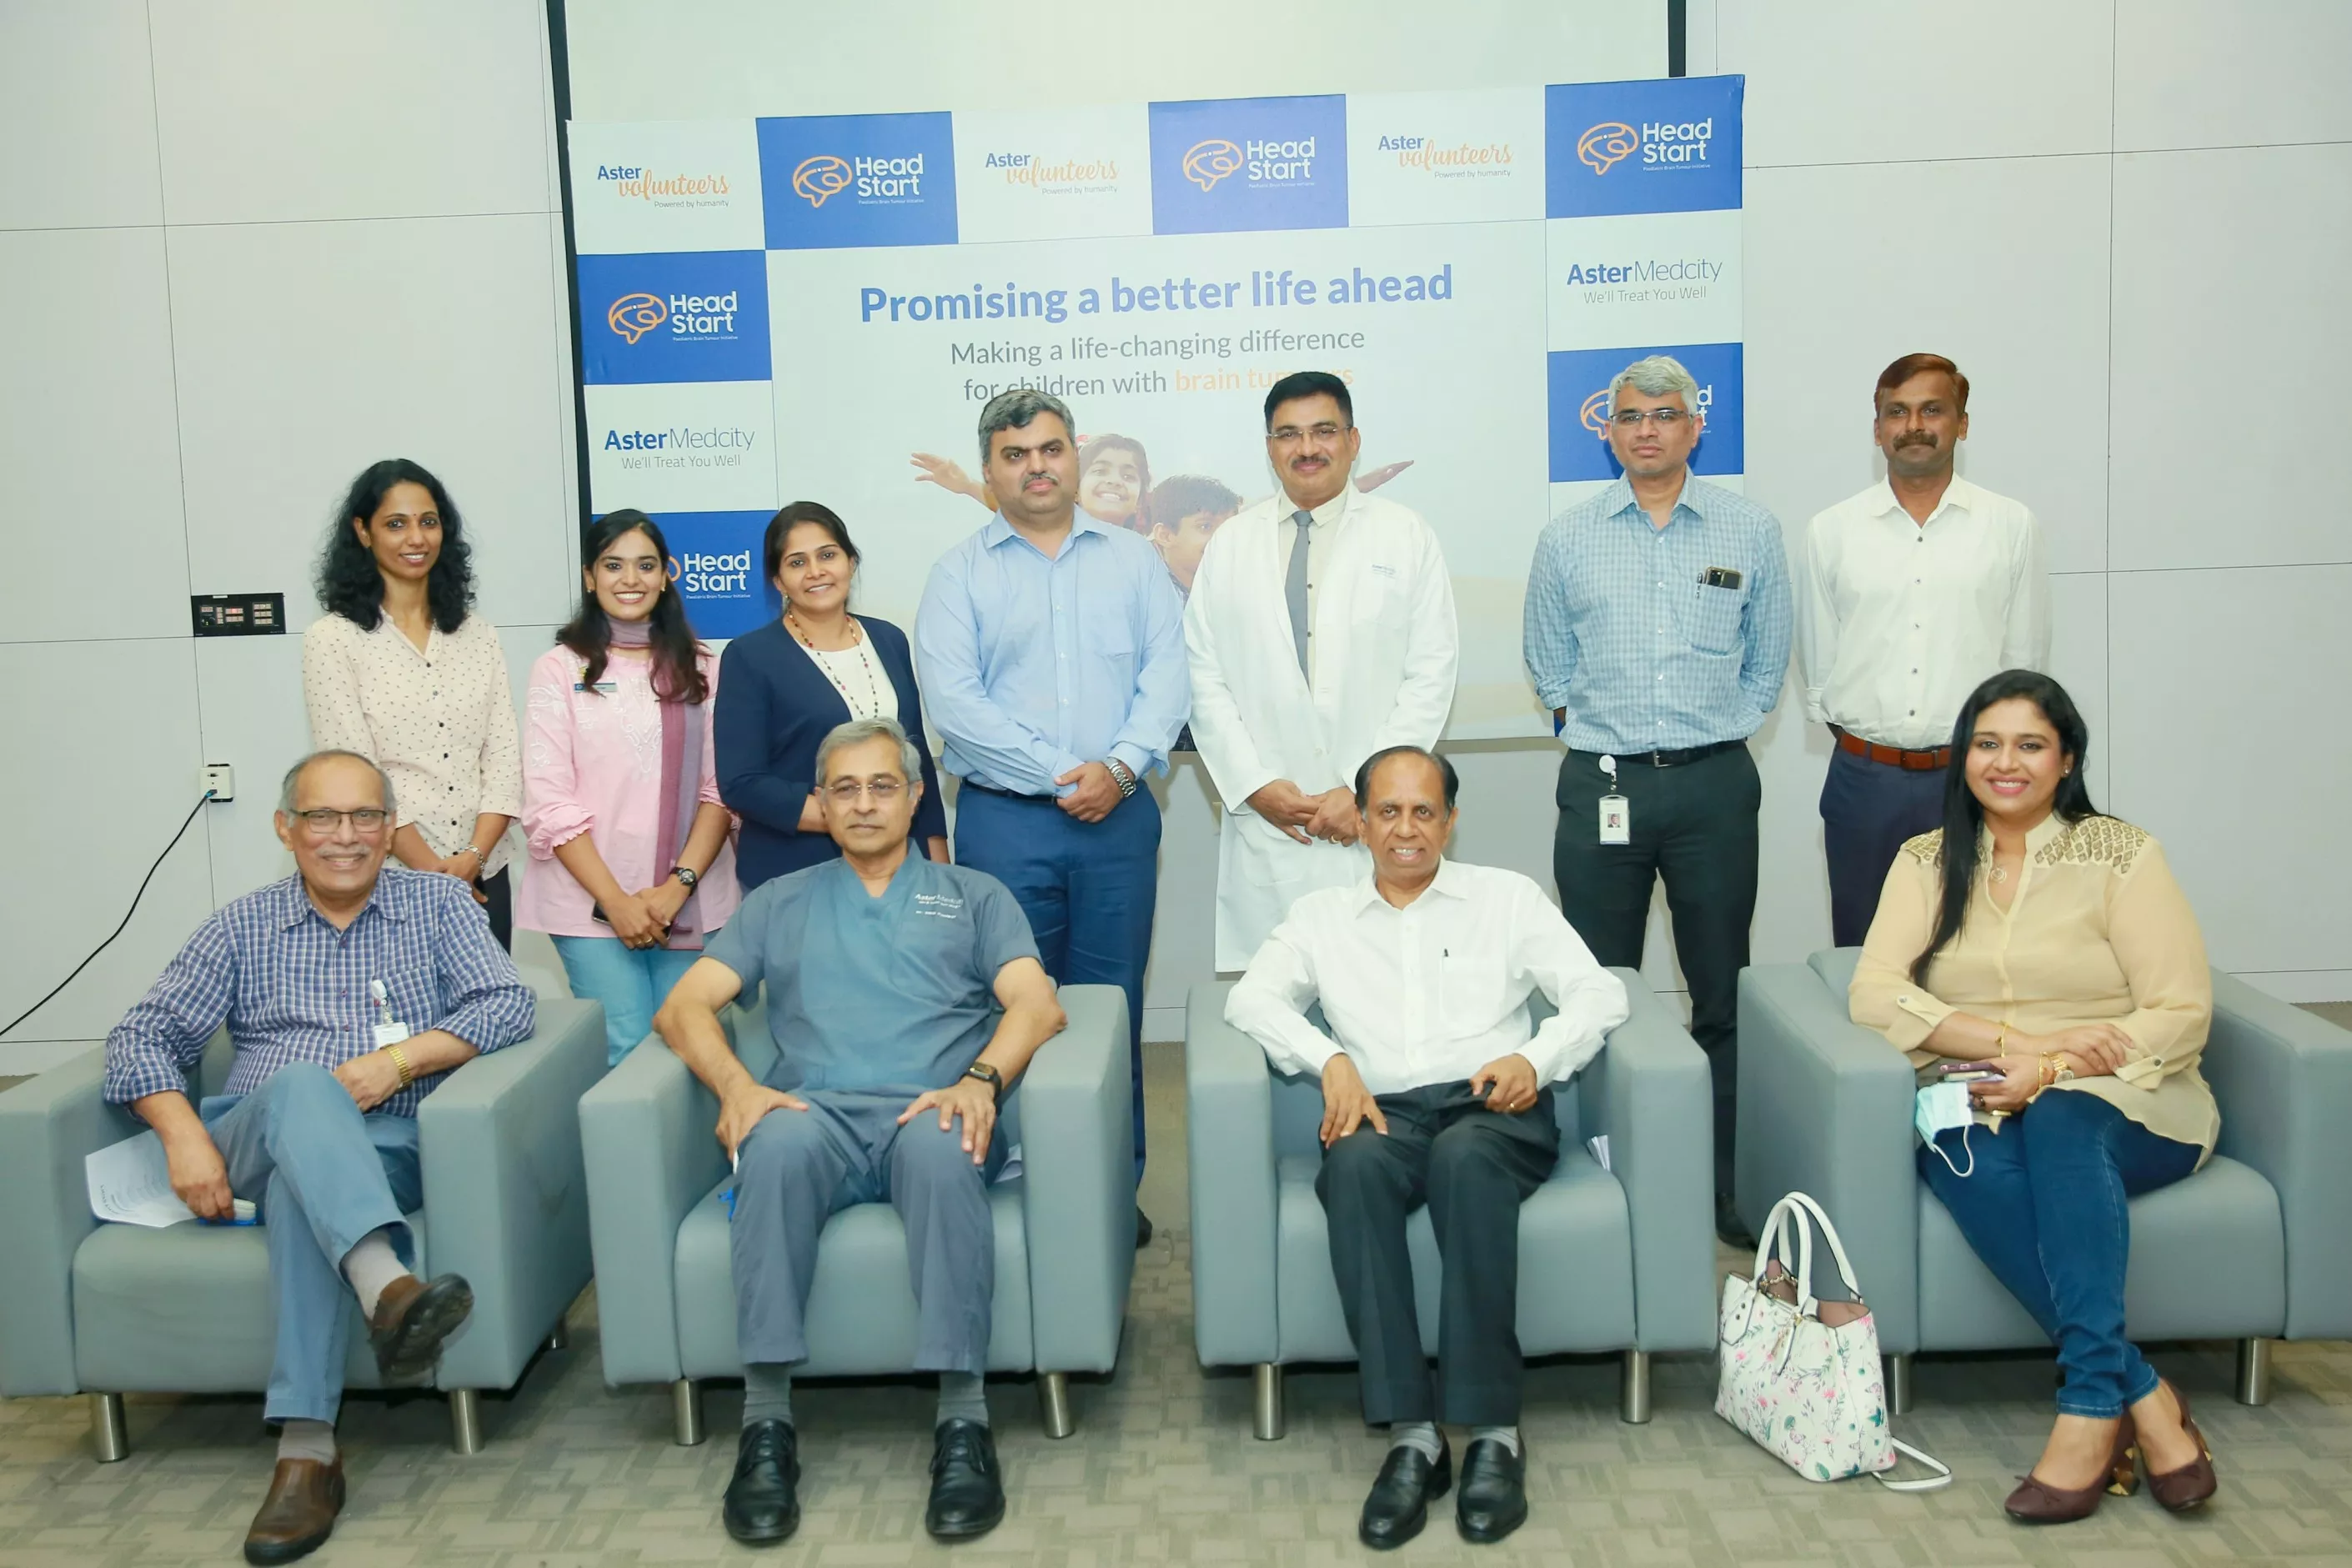 Treatment for paediatric brain tumour; NeST Group and Geojit join hands with Aster’s Head Start